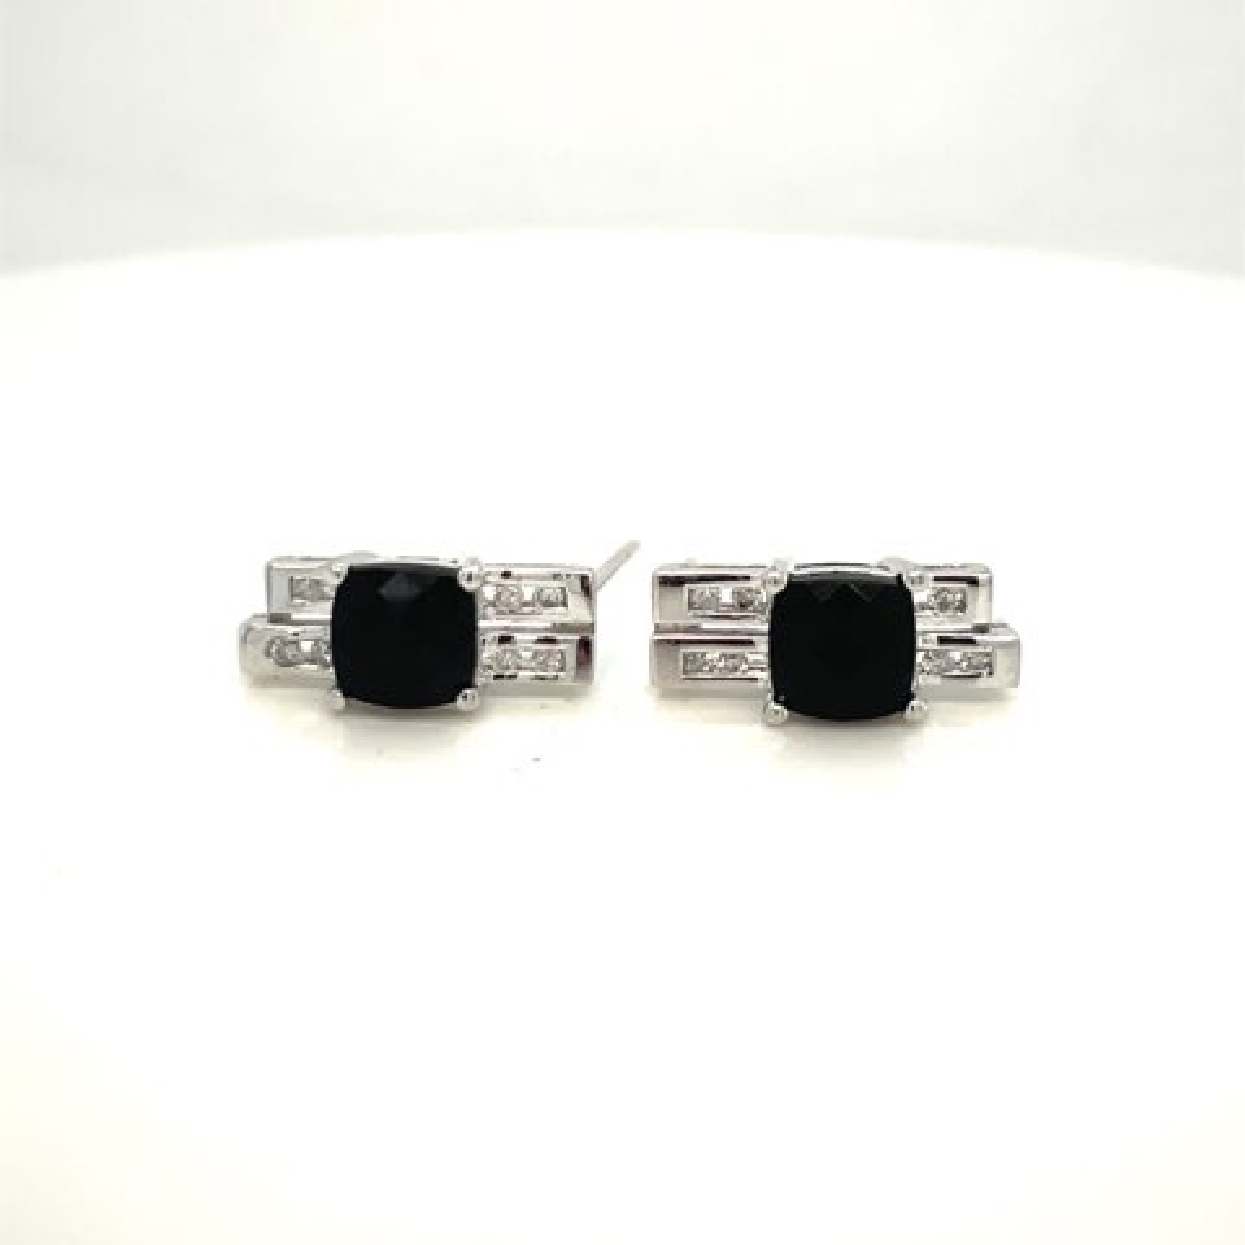 14K White Gold Earrings with Black Center Stone and Diamonds